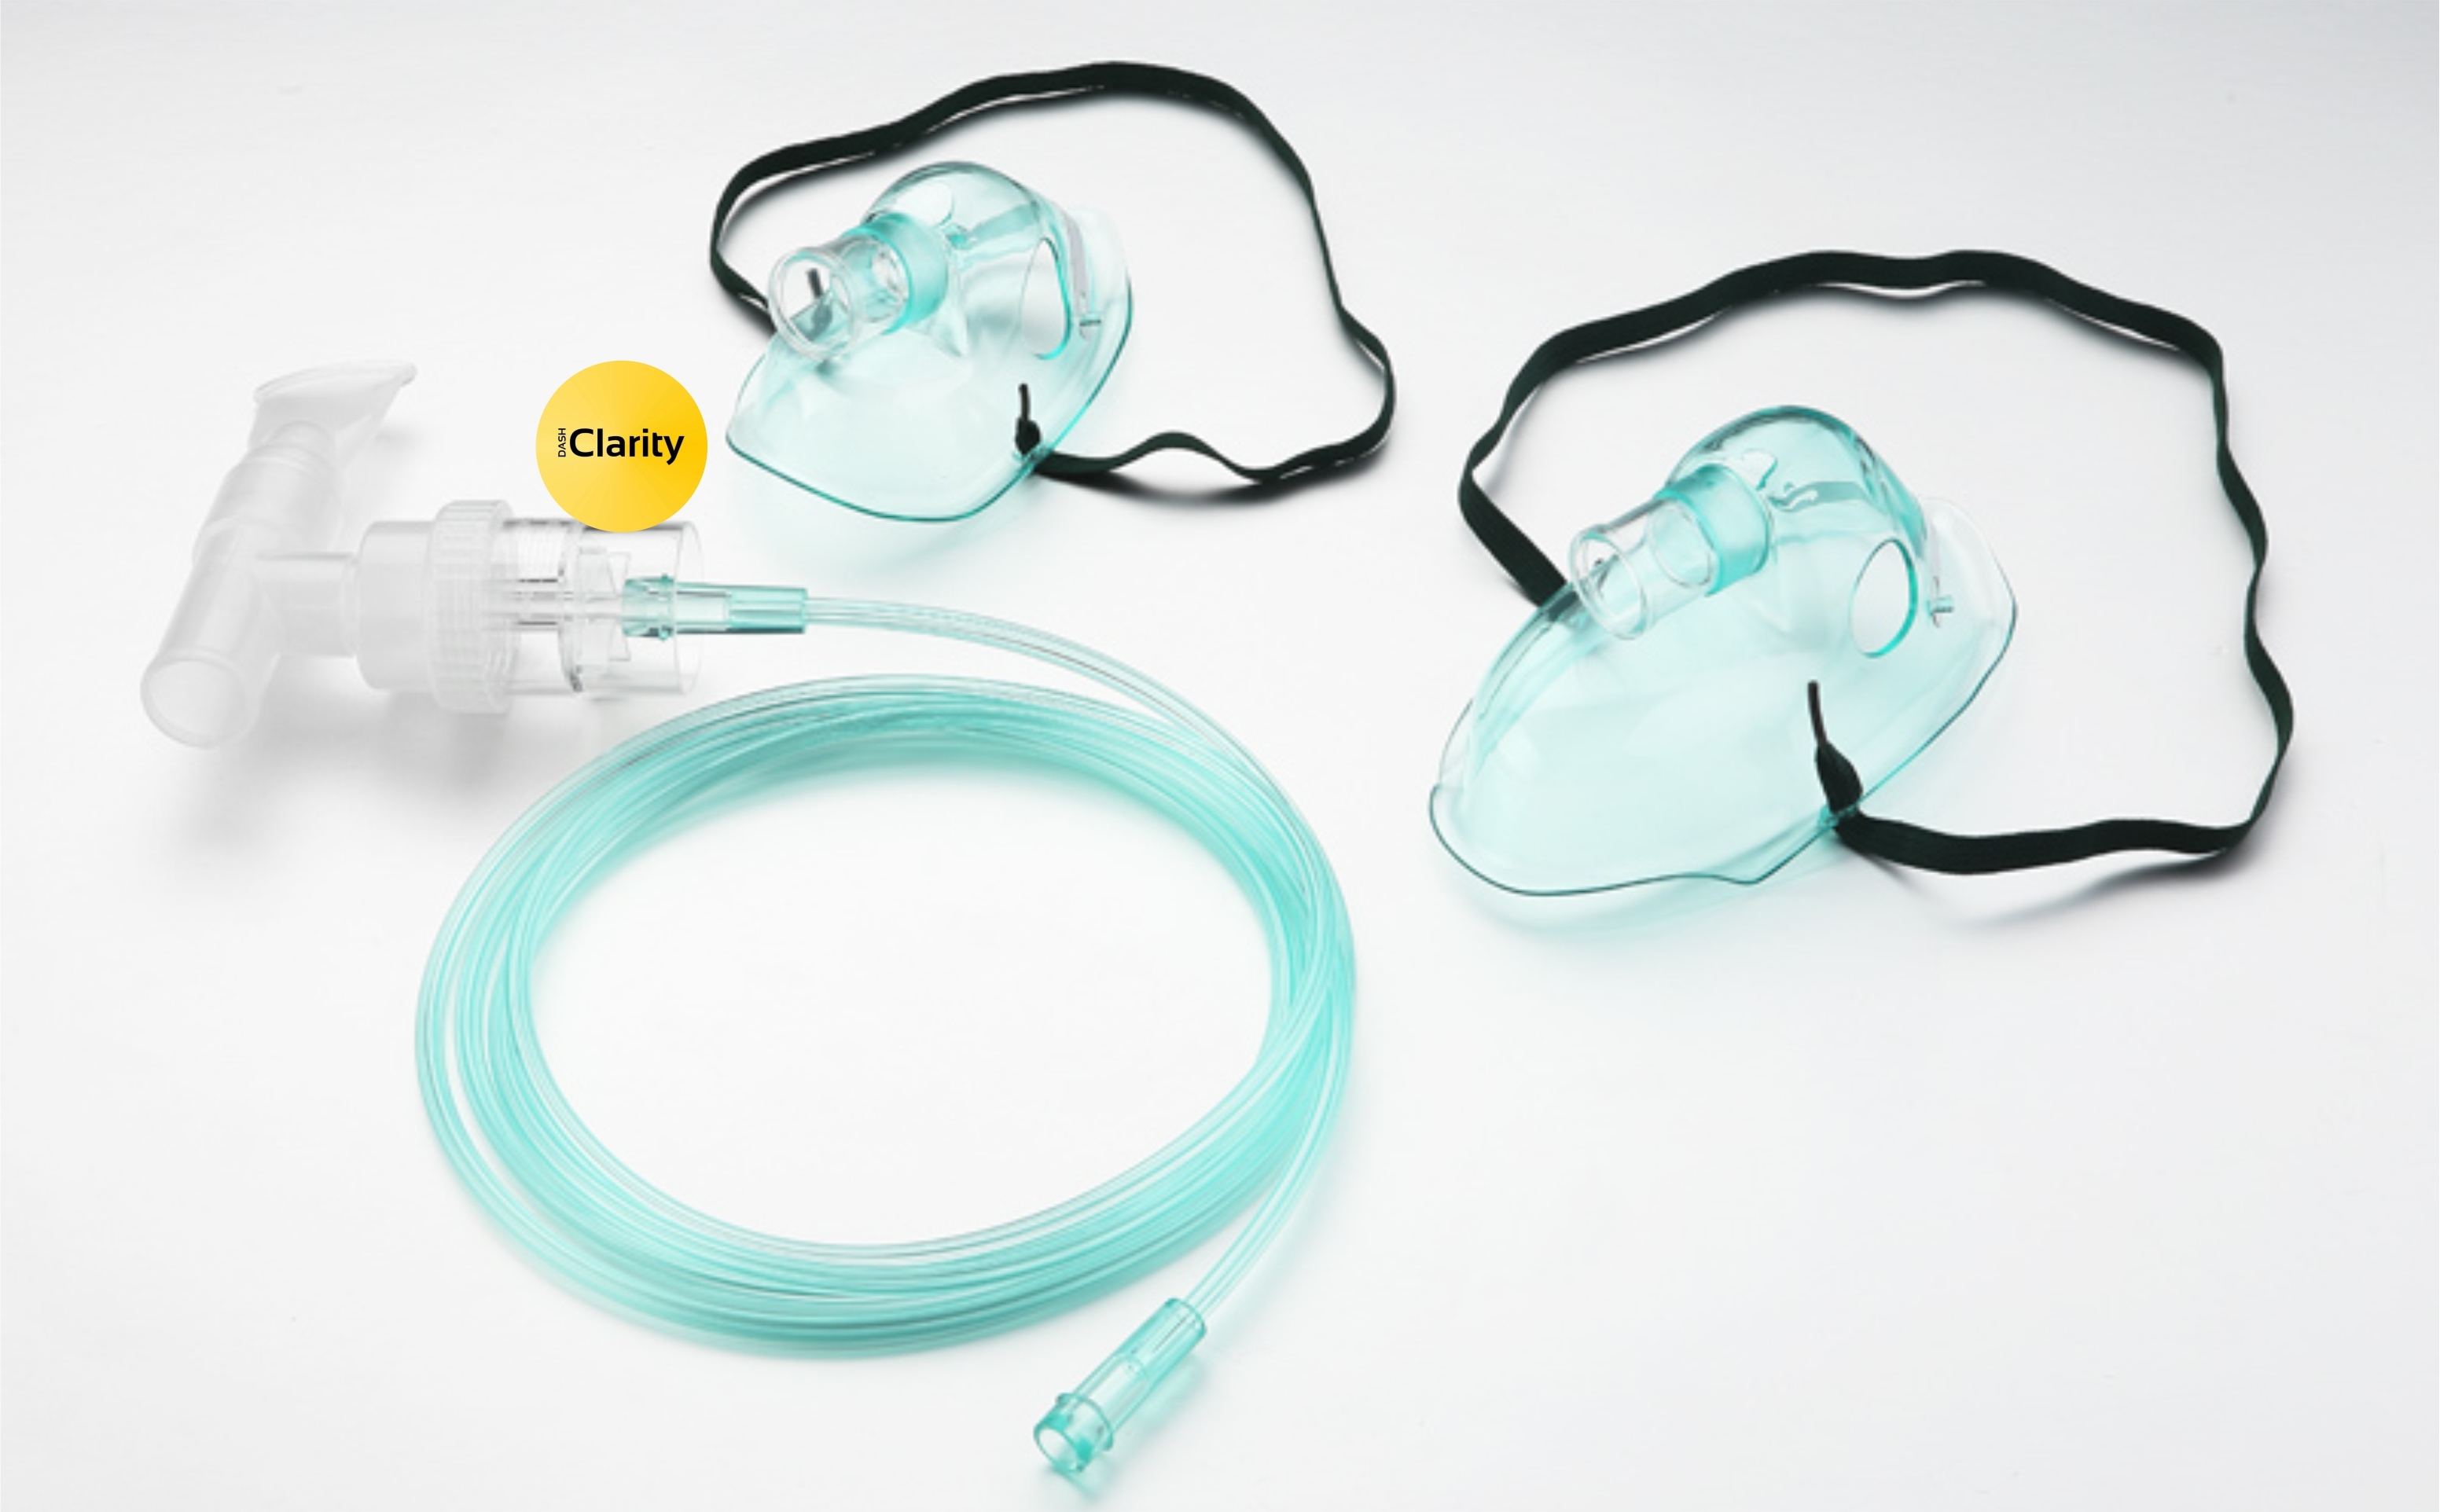 Nebulizer Mask with T and Mouthpiece